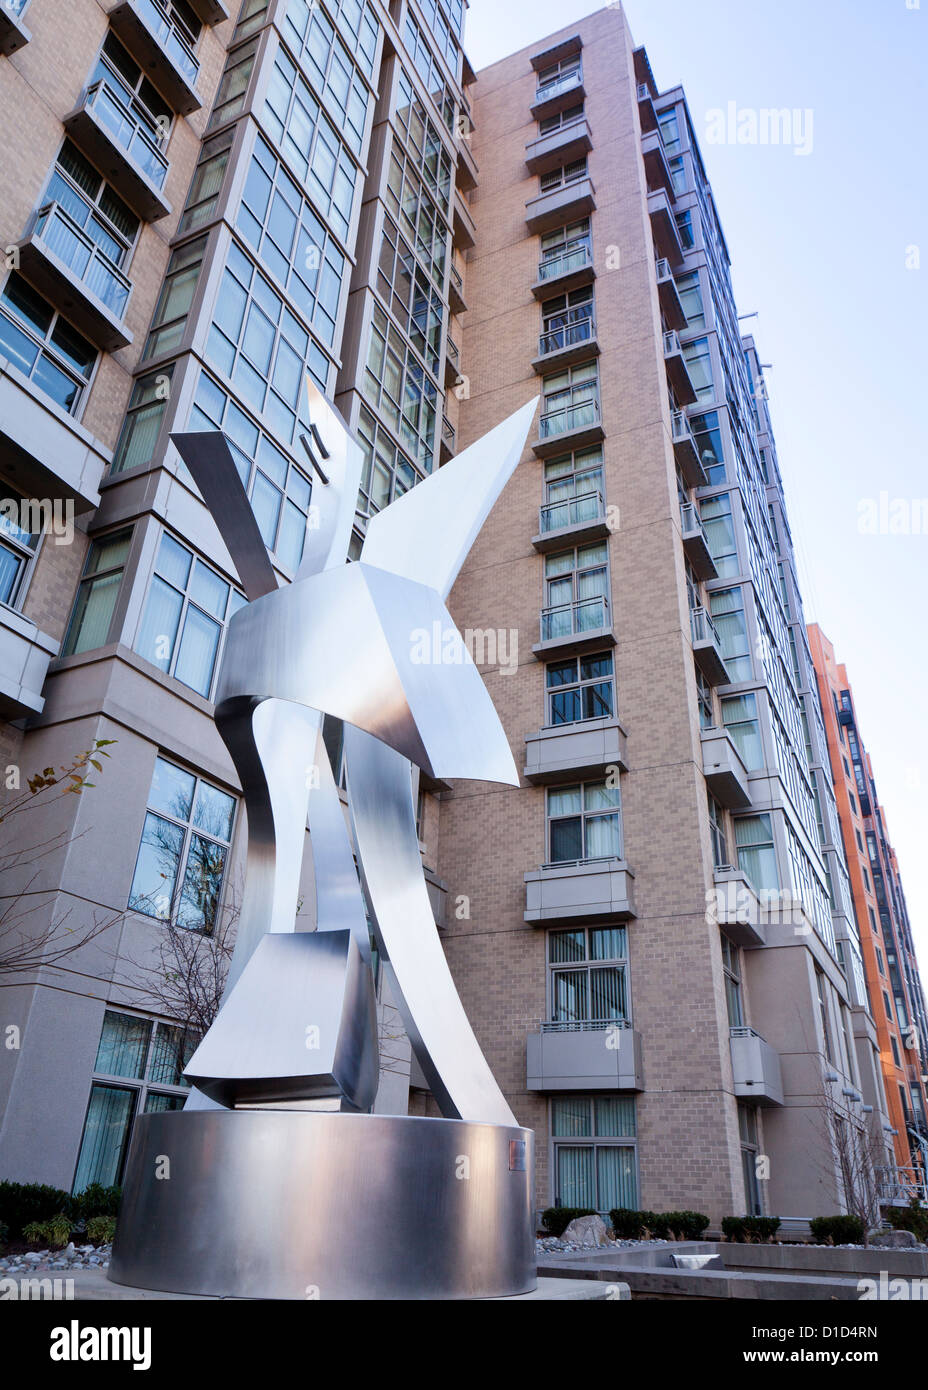 Stainless steal sculpture in front of building Stock Photo